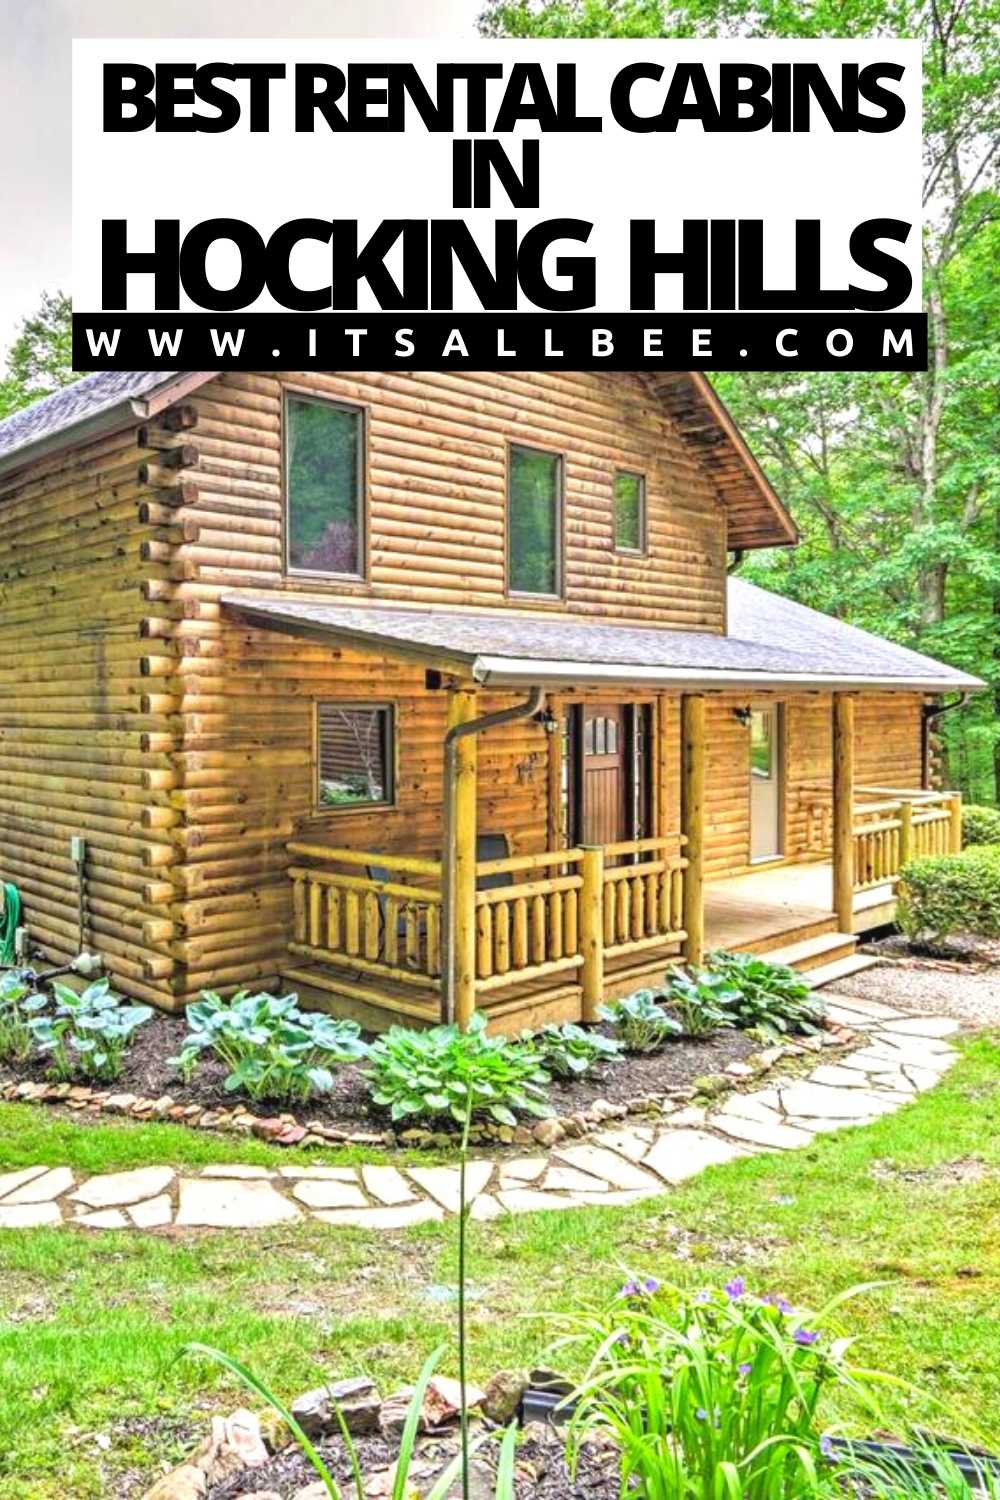 Old Man’s Cave Cabins | Hocking Hills State Park Cabins | Cheap Hocking Hills Cabin Rentals | Hocking Hills Luxury Cabins | Getaway Cabins Hocking Hills